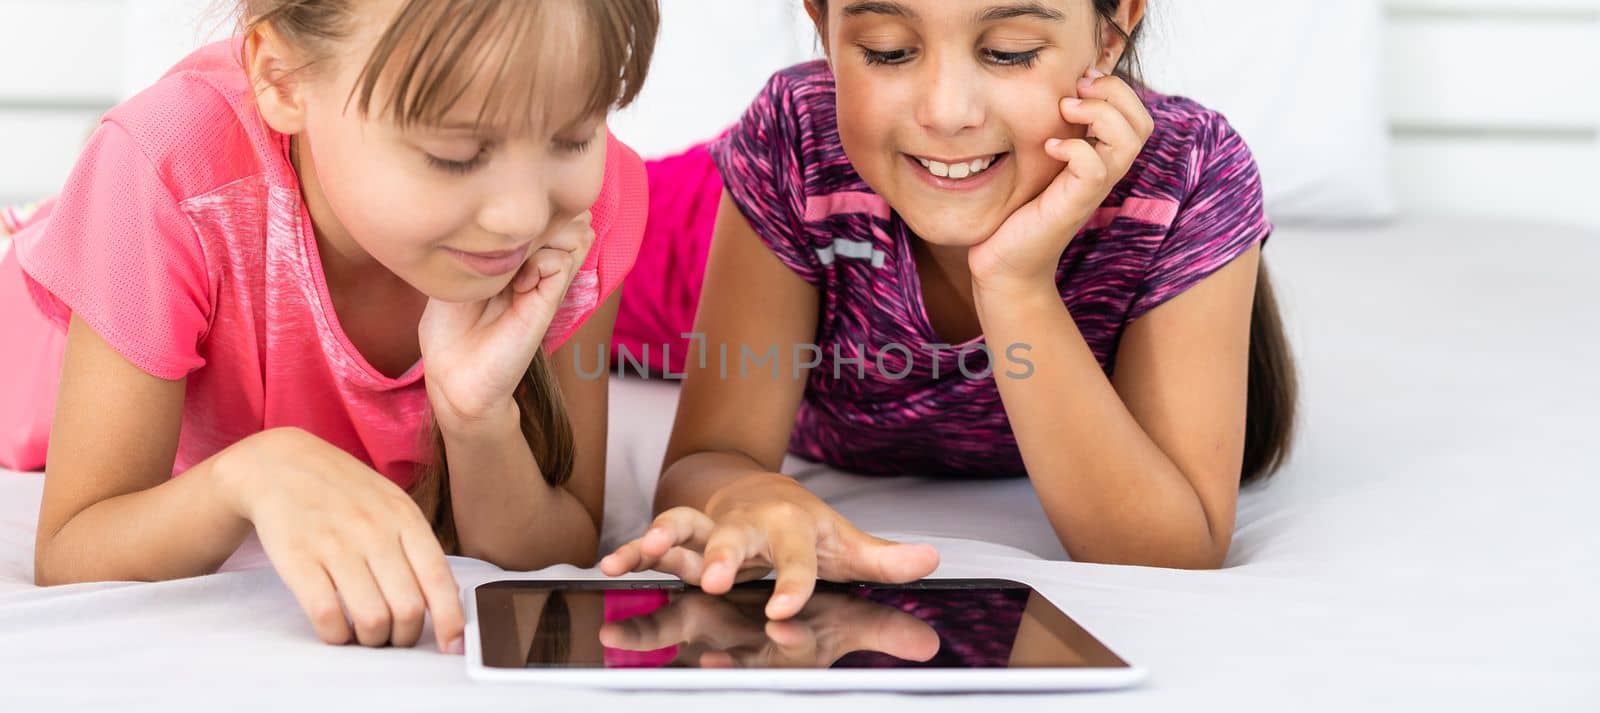 Little girls using tablet computer as art board - painting together by Andelov13